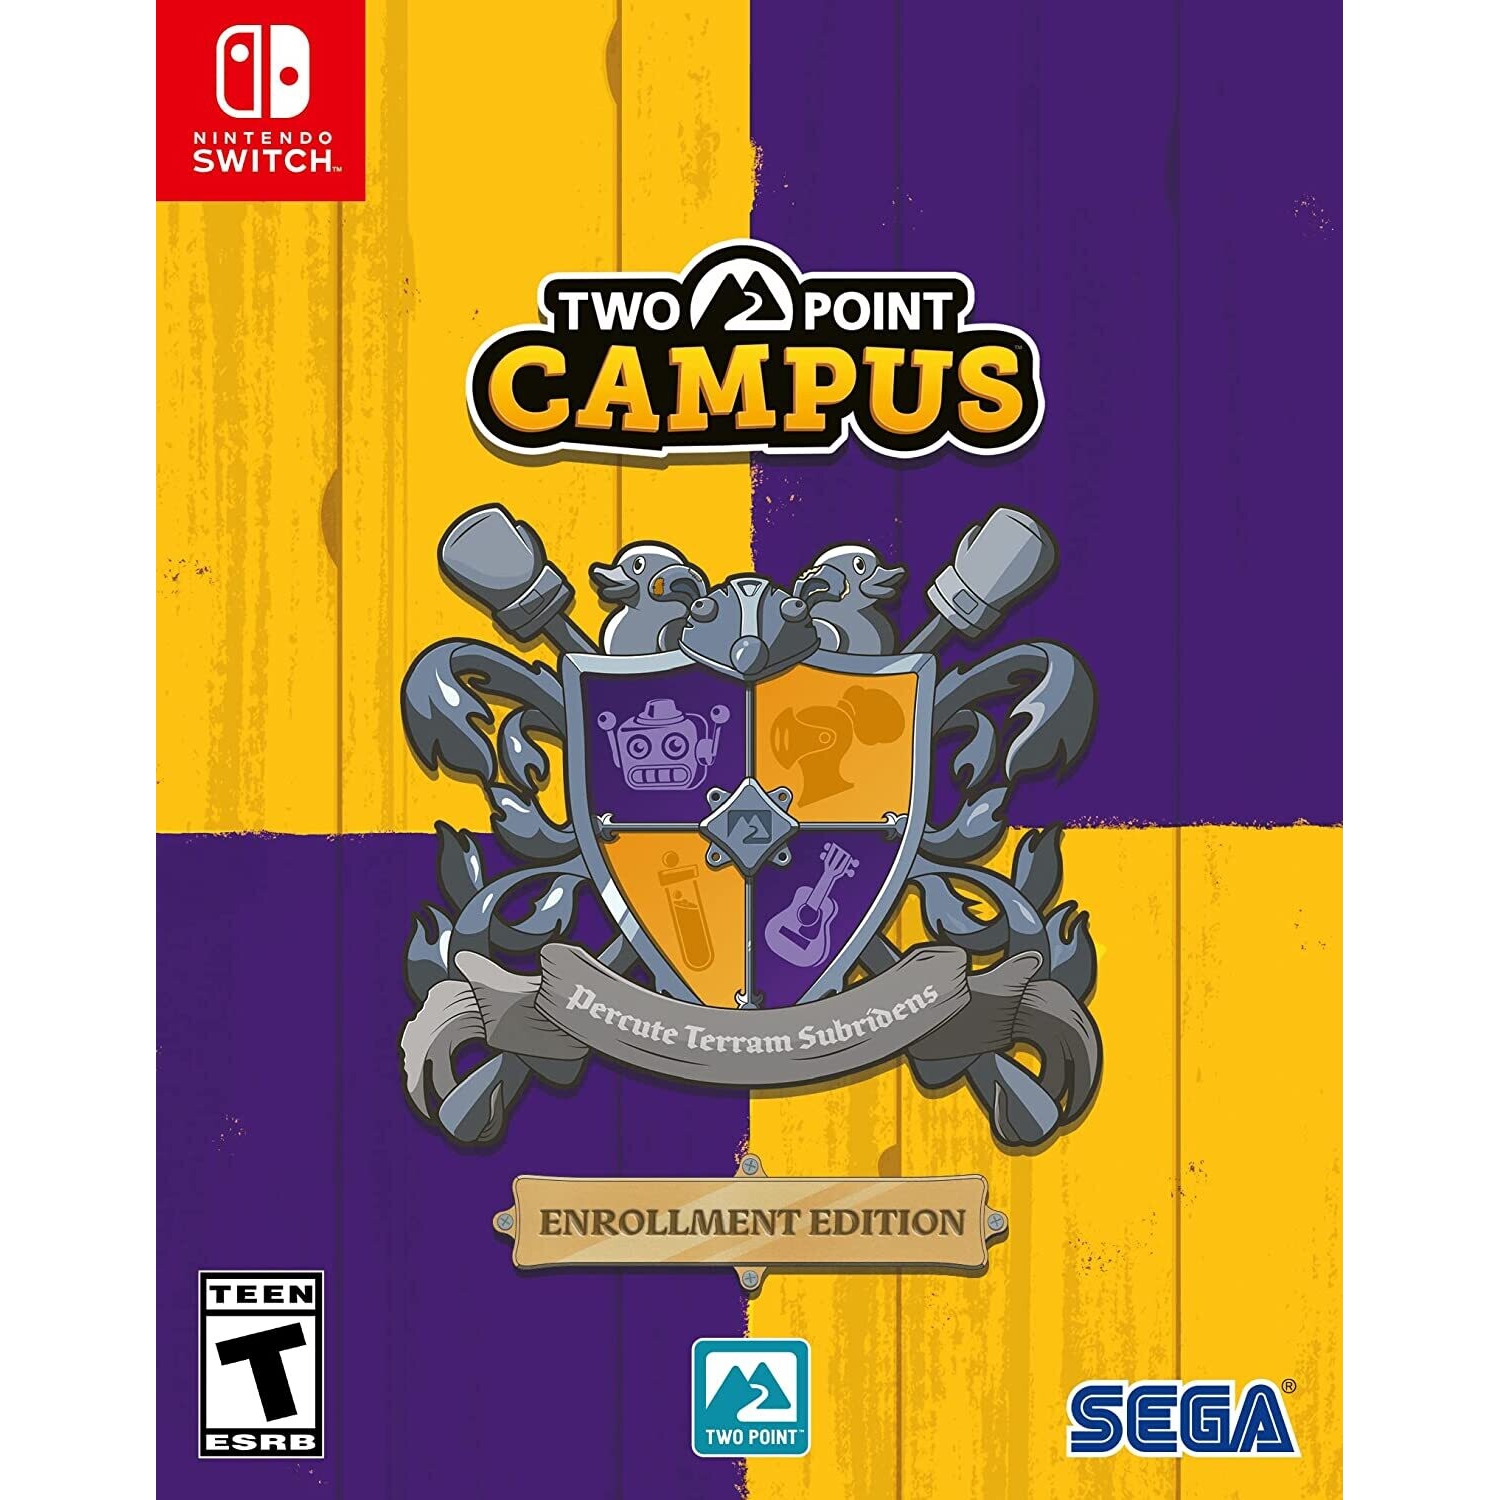 Two Point Campus Enrollment Launch Edition for Nintendo Switch [VIDEOGAMES]